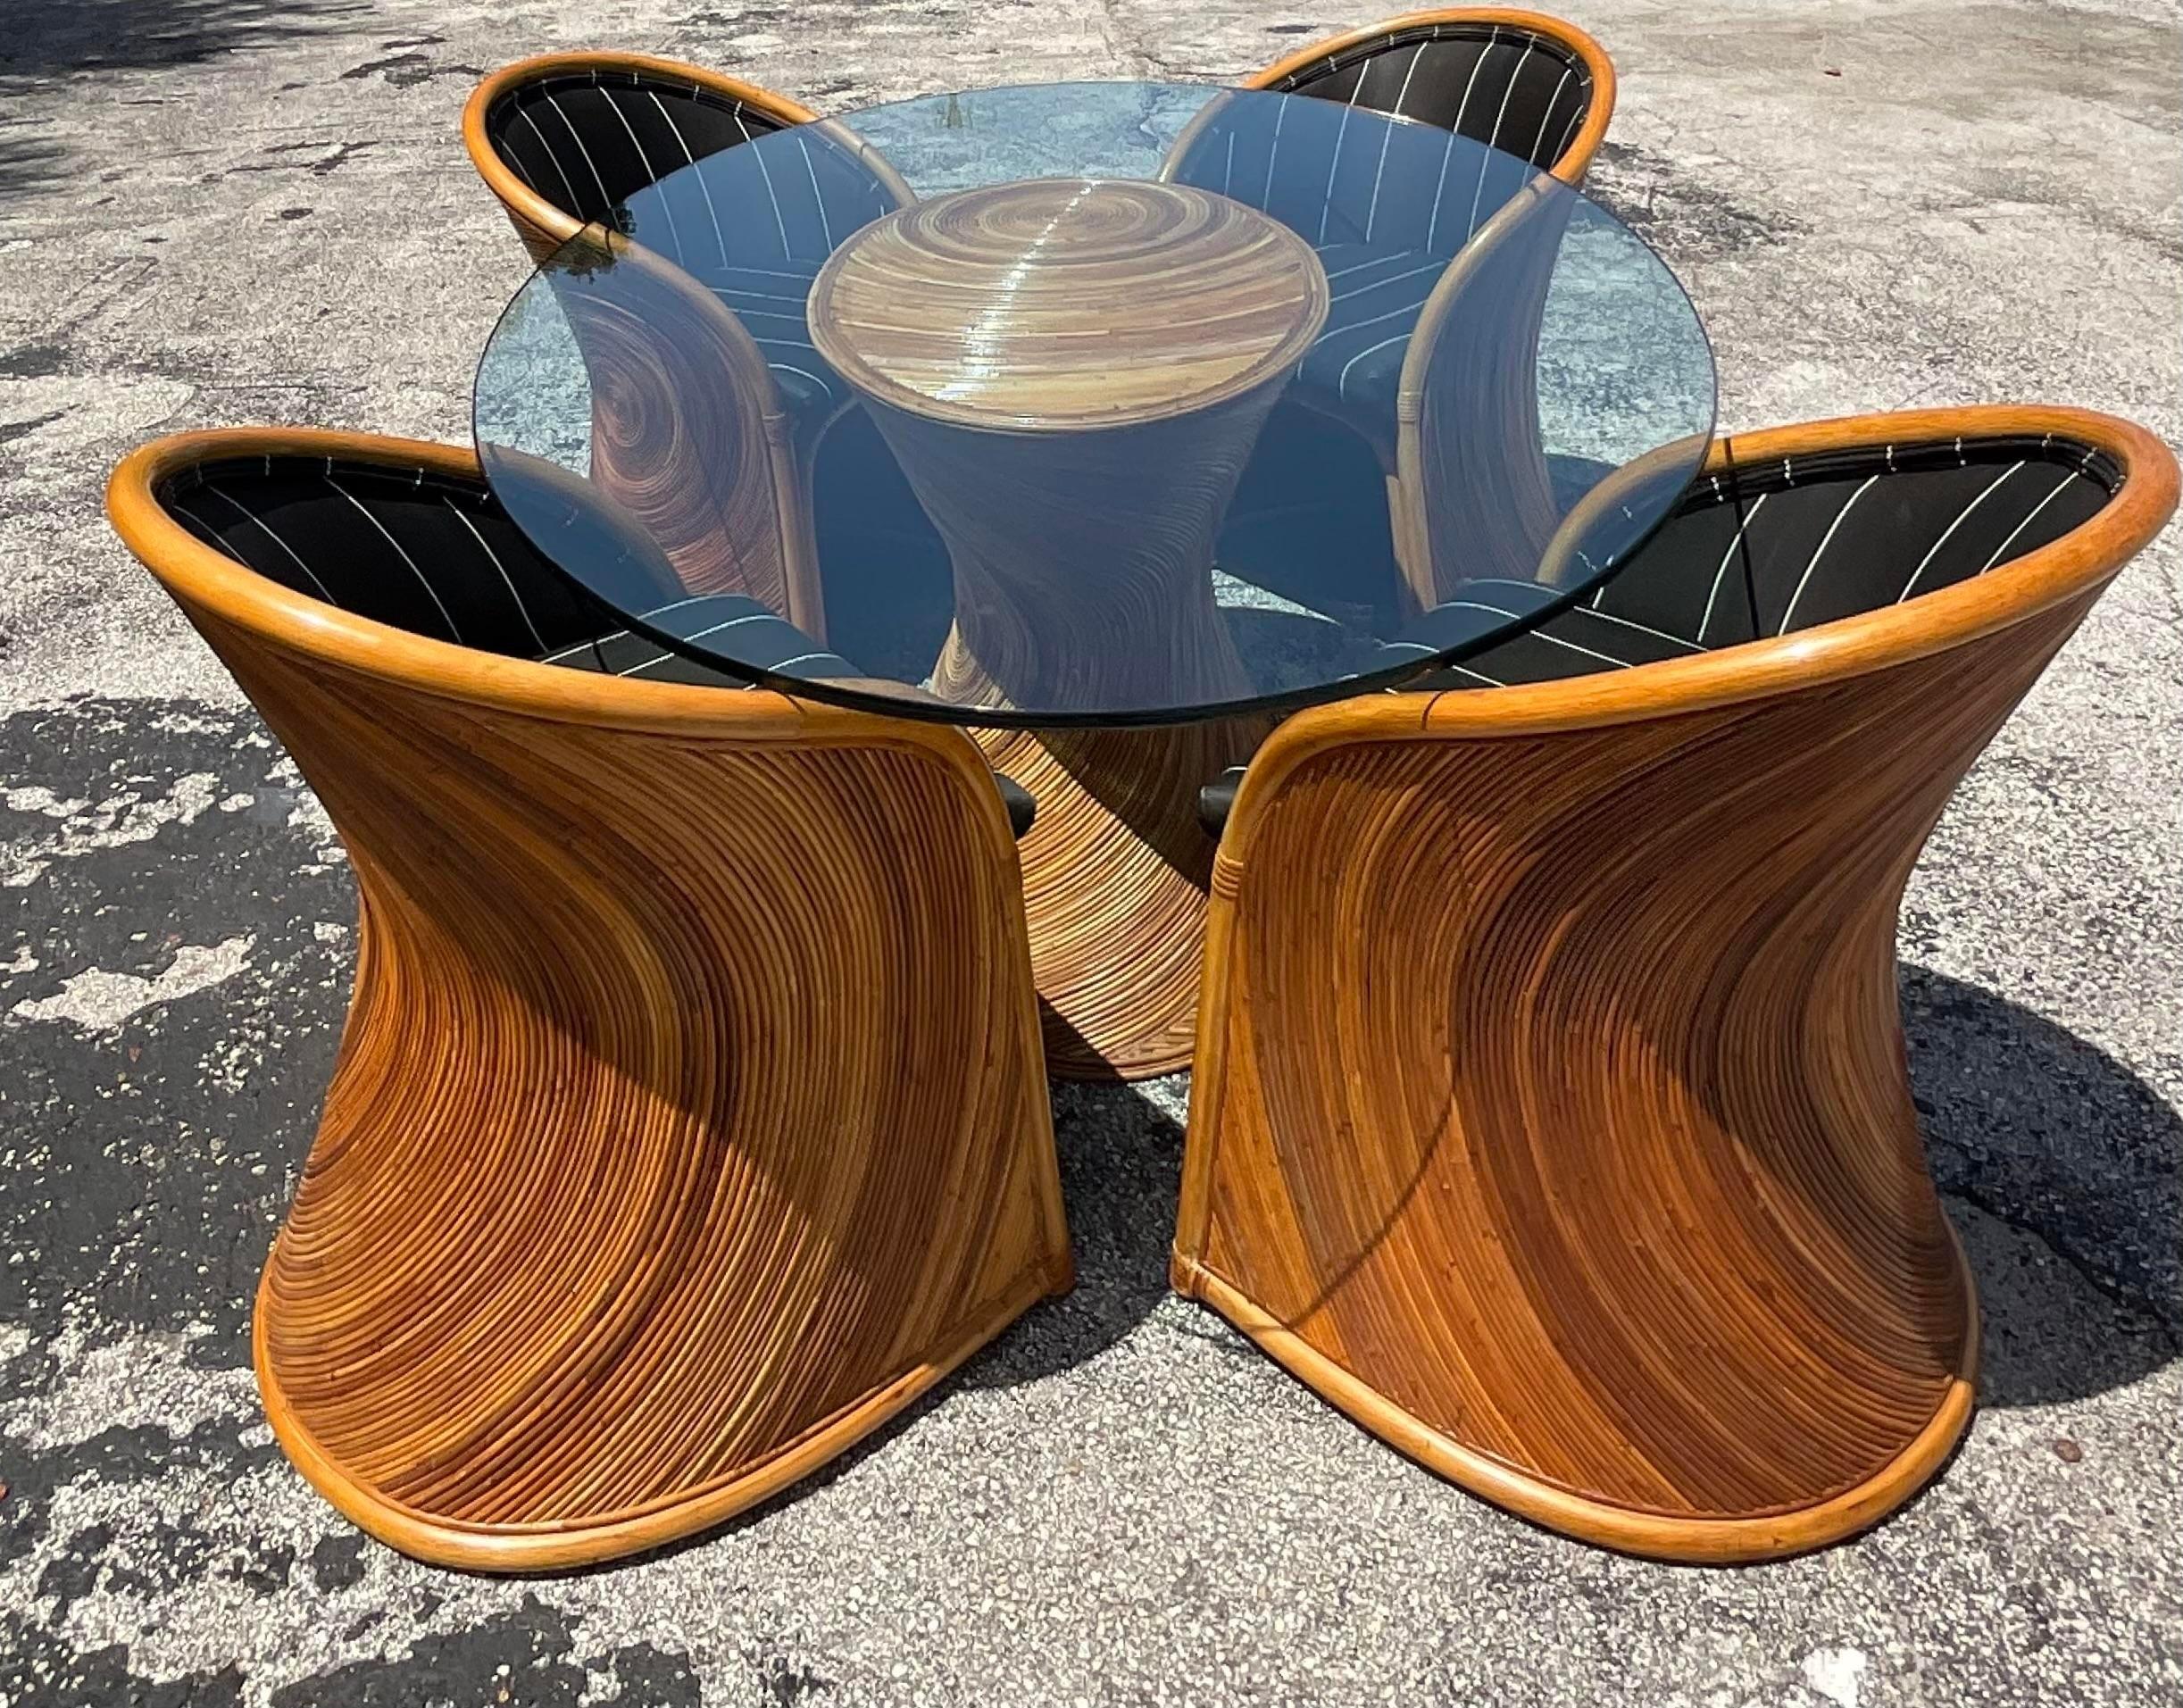 A fantastic vintage Boho dining table. A chic pencil reed construction with the radiating sun design. Matching dining chairs also available on my page. Acquired from a Miami estate. 